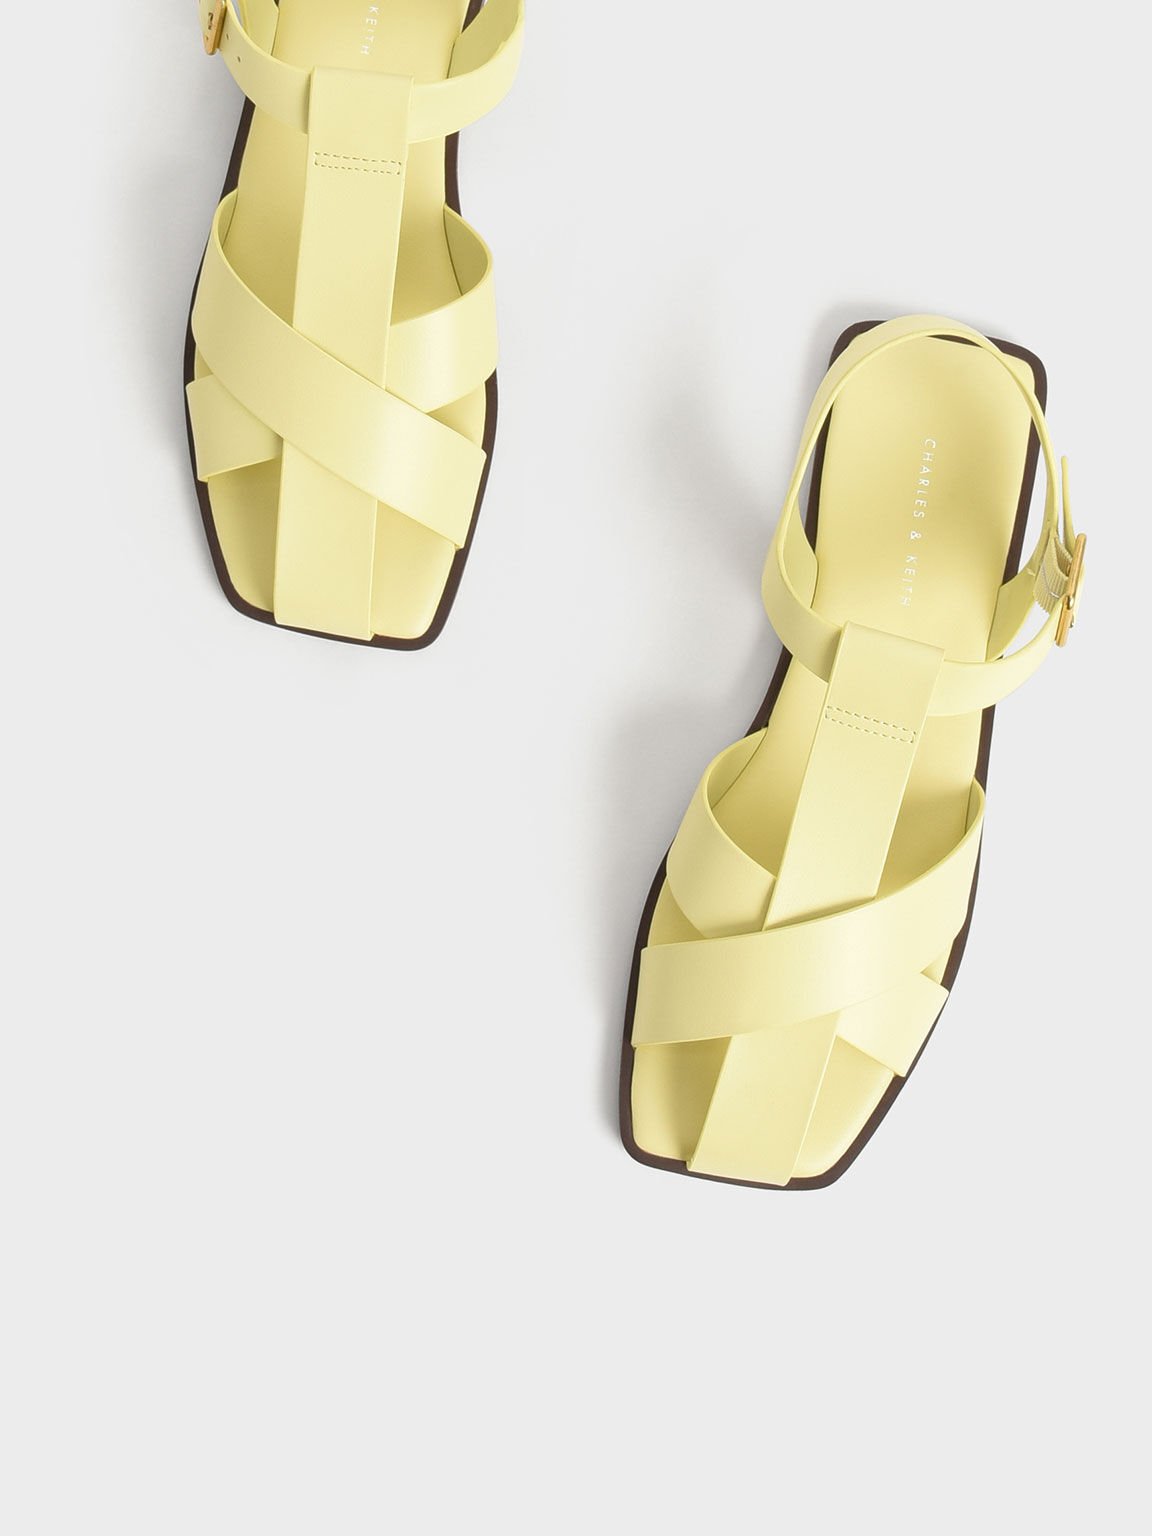 Strappy Crossover Sandals, Yellow, hi-res